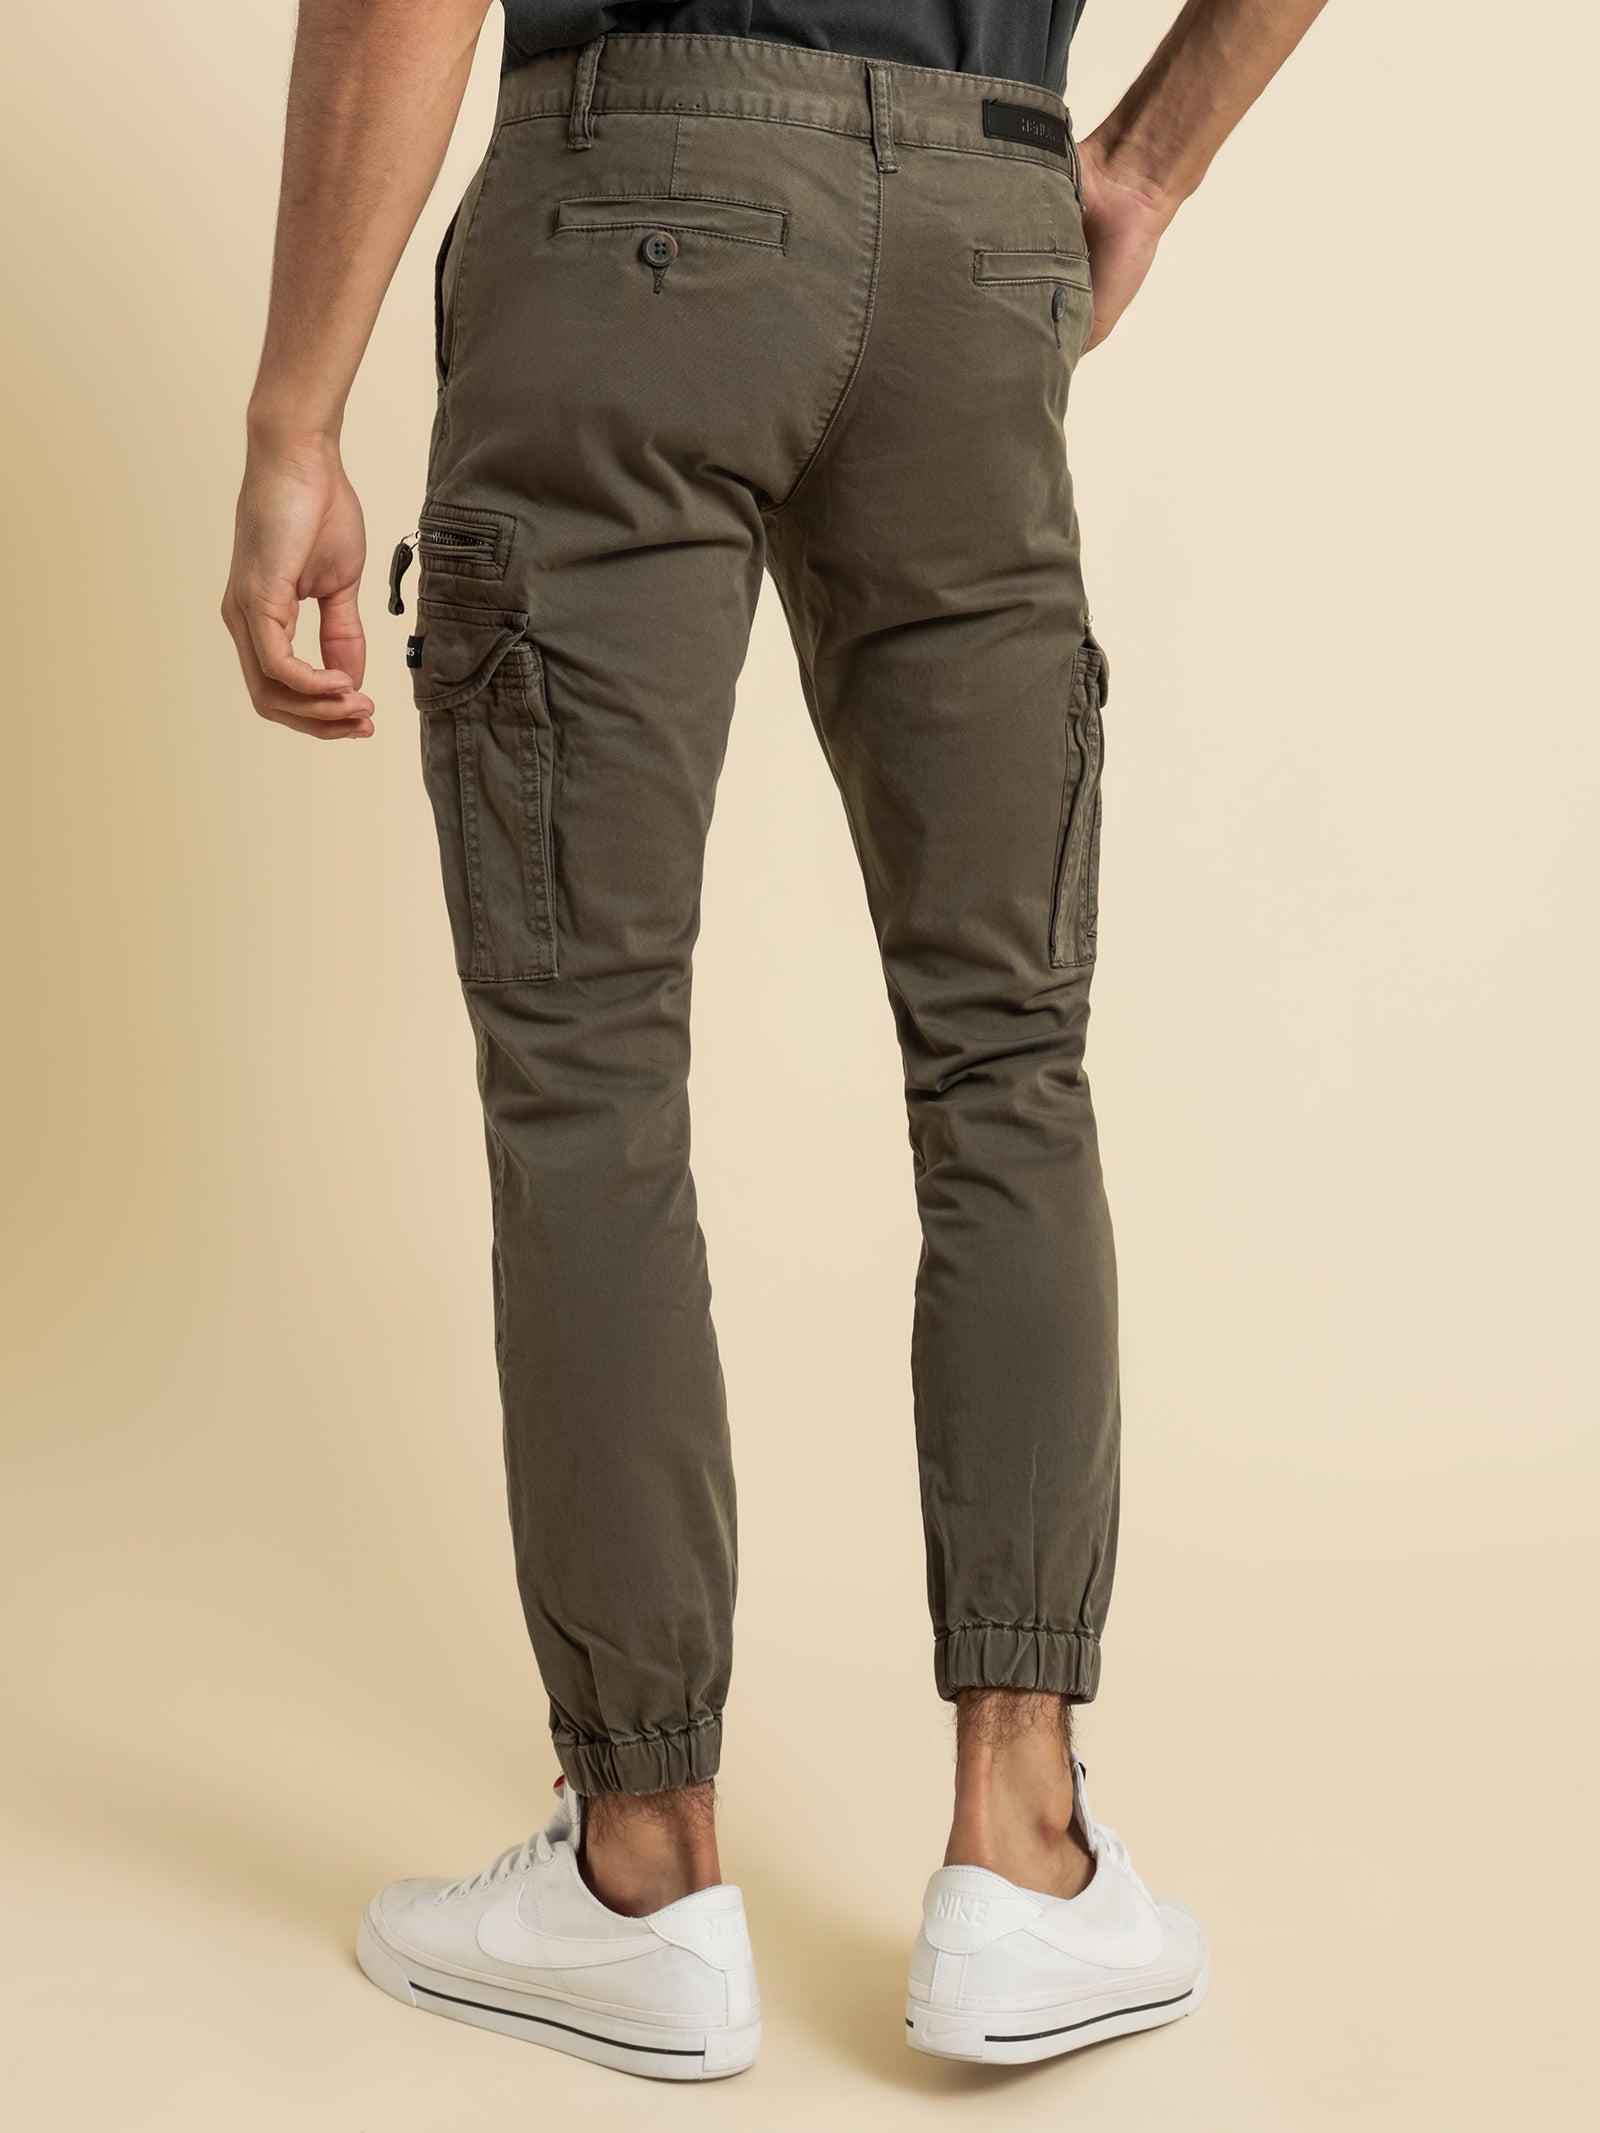 Eagle Cargo Pants in Army Green - Glue Store